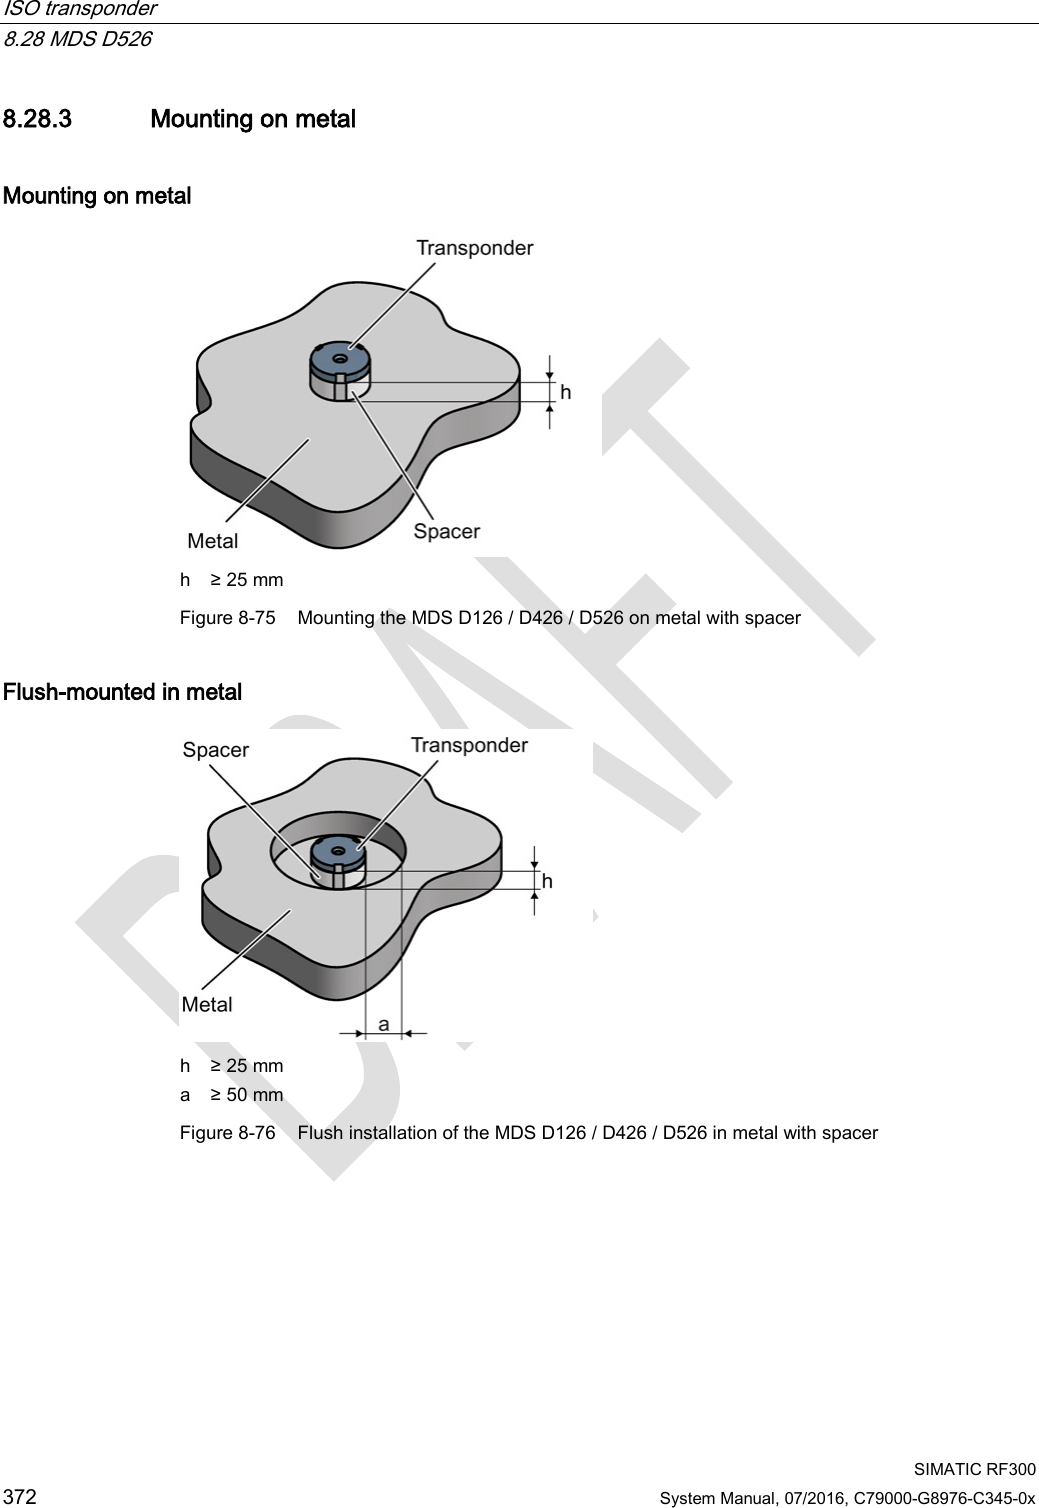 ISO transponder   8.28 MDS D526  SIMATIC RF300 372 System Manual, 07/2016, C79000-G8976-C345-0x 8.28.3 Mounting on metal Mounting on metal  h ≥ 25 mm Figure 8-75 Mounting the MDS D126 / D426 / D526 on metal with spacer Flush-mounted in metal  h ≥ 25 mm a ≥ 50 mm Figure 8-76 Flush installation of the MDS D126 / D426 / D526 in metal with spacer 